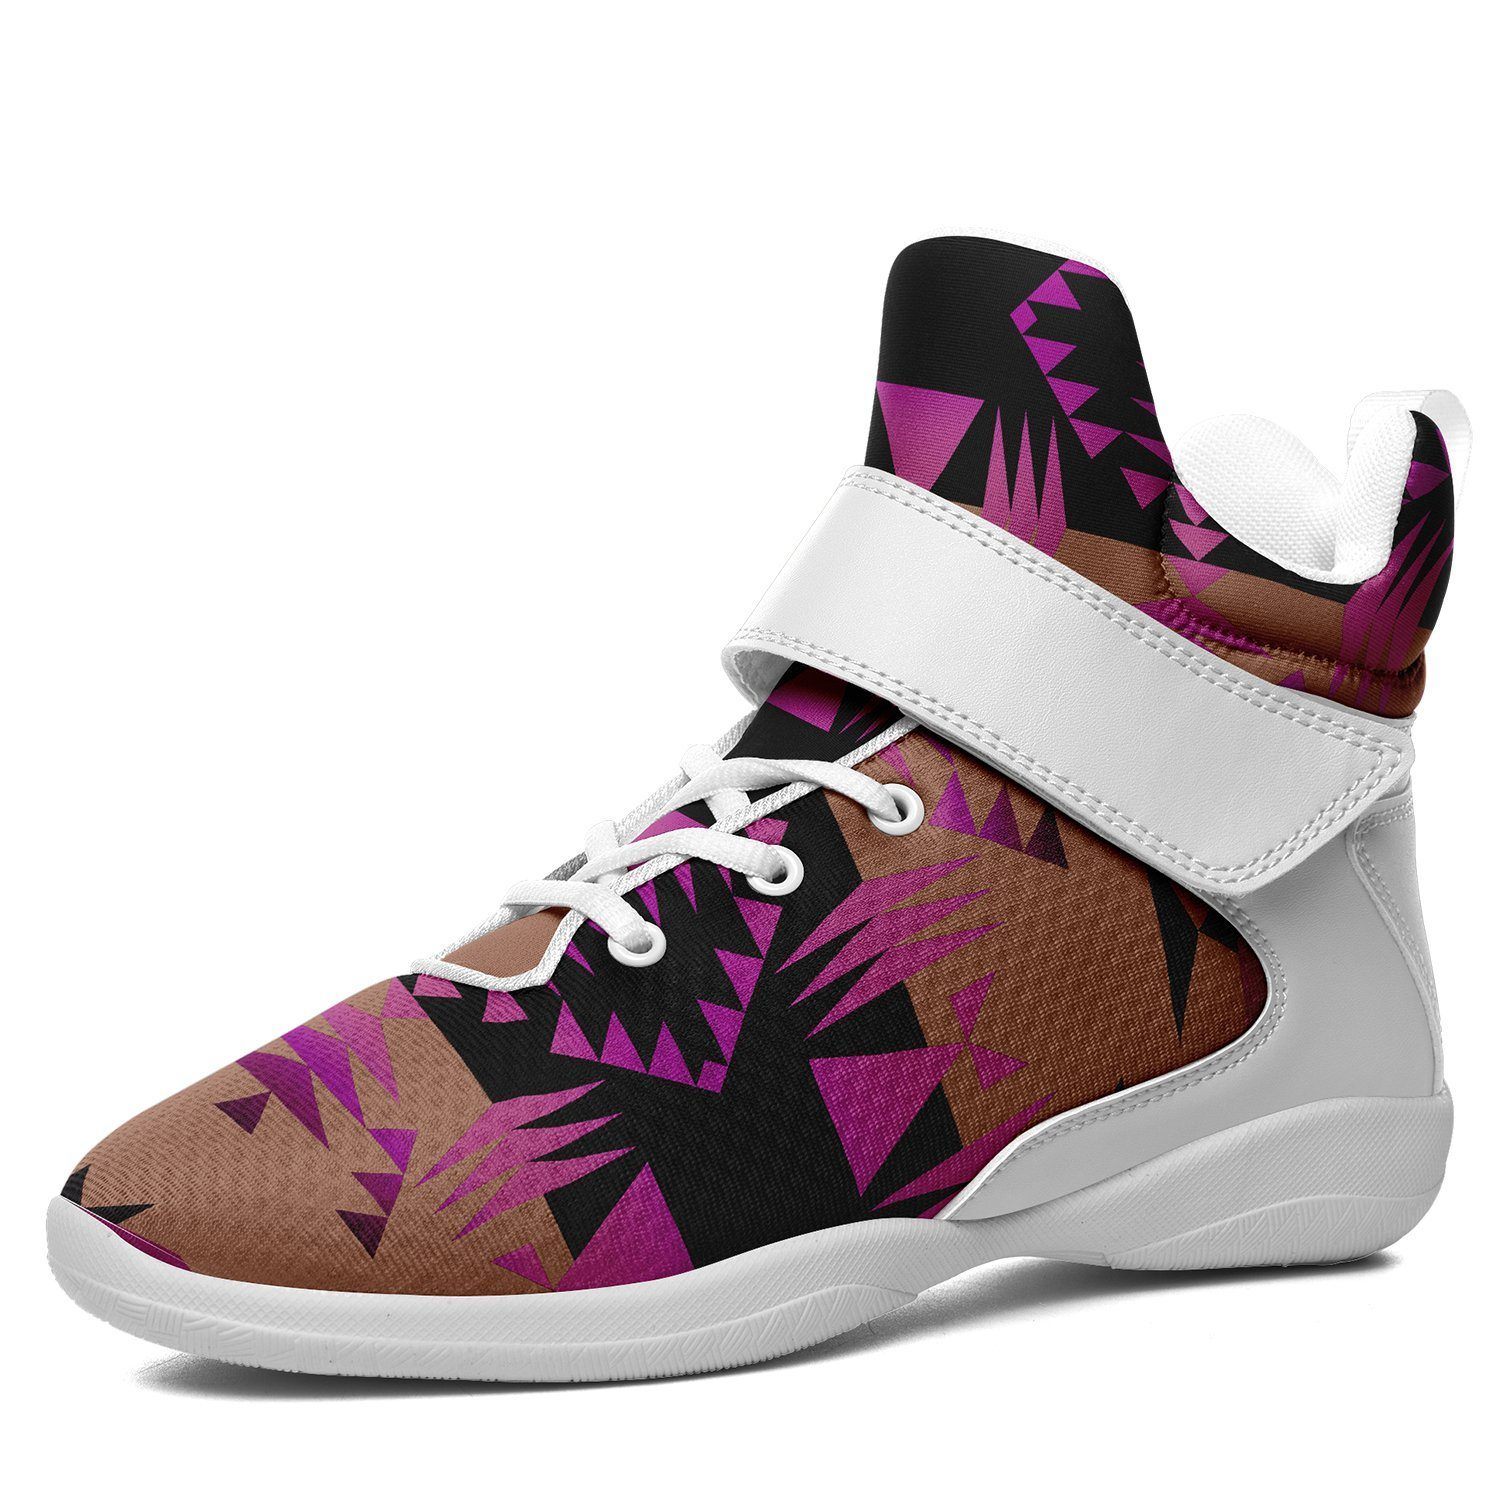 Between the Mountains Berry Kid's Ipottaa Basketball / Sport High Top Shoes 49 Dzine US Women 4.5 / US Youth 3.5 / EUR 35 White Sole with White Strap 